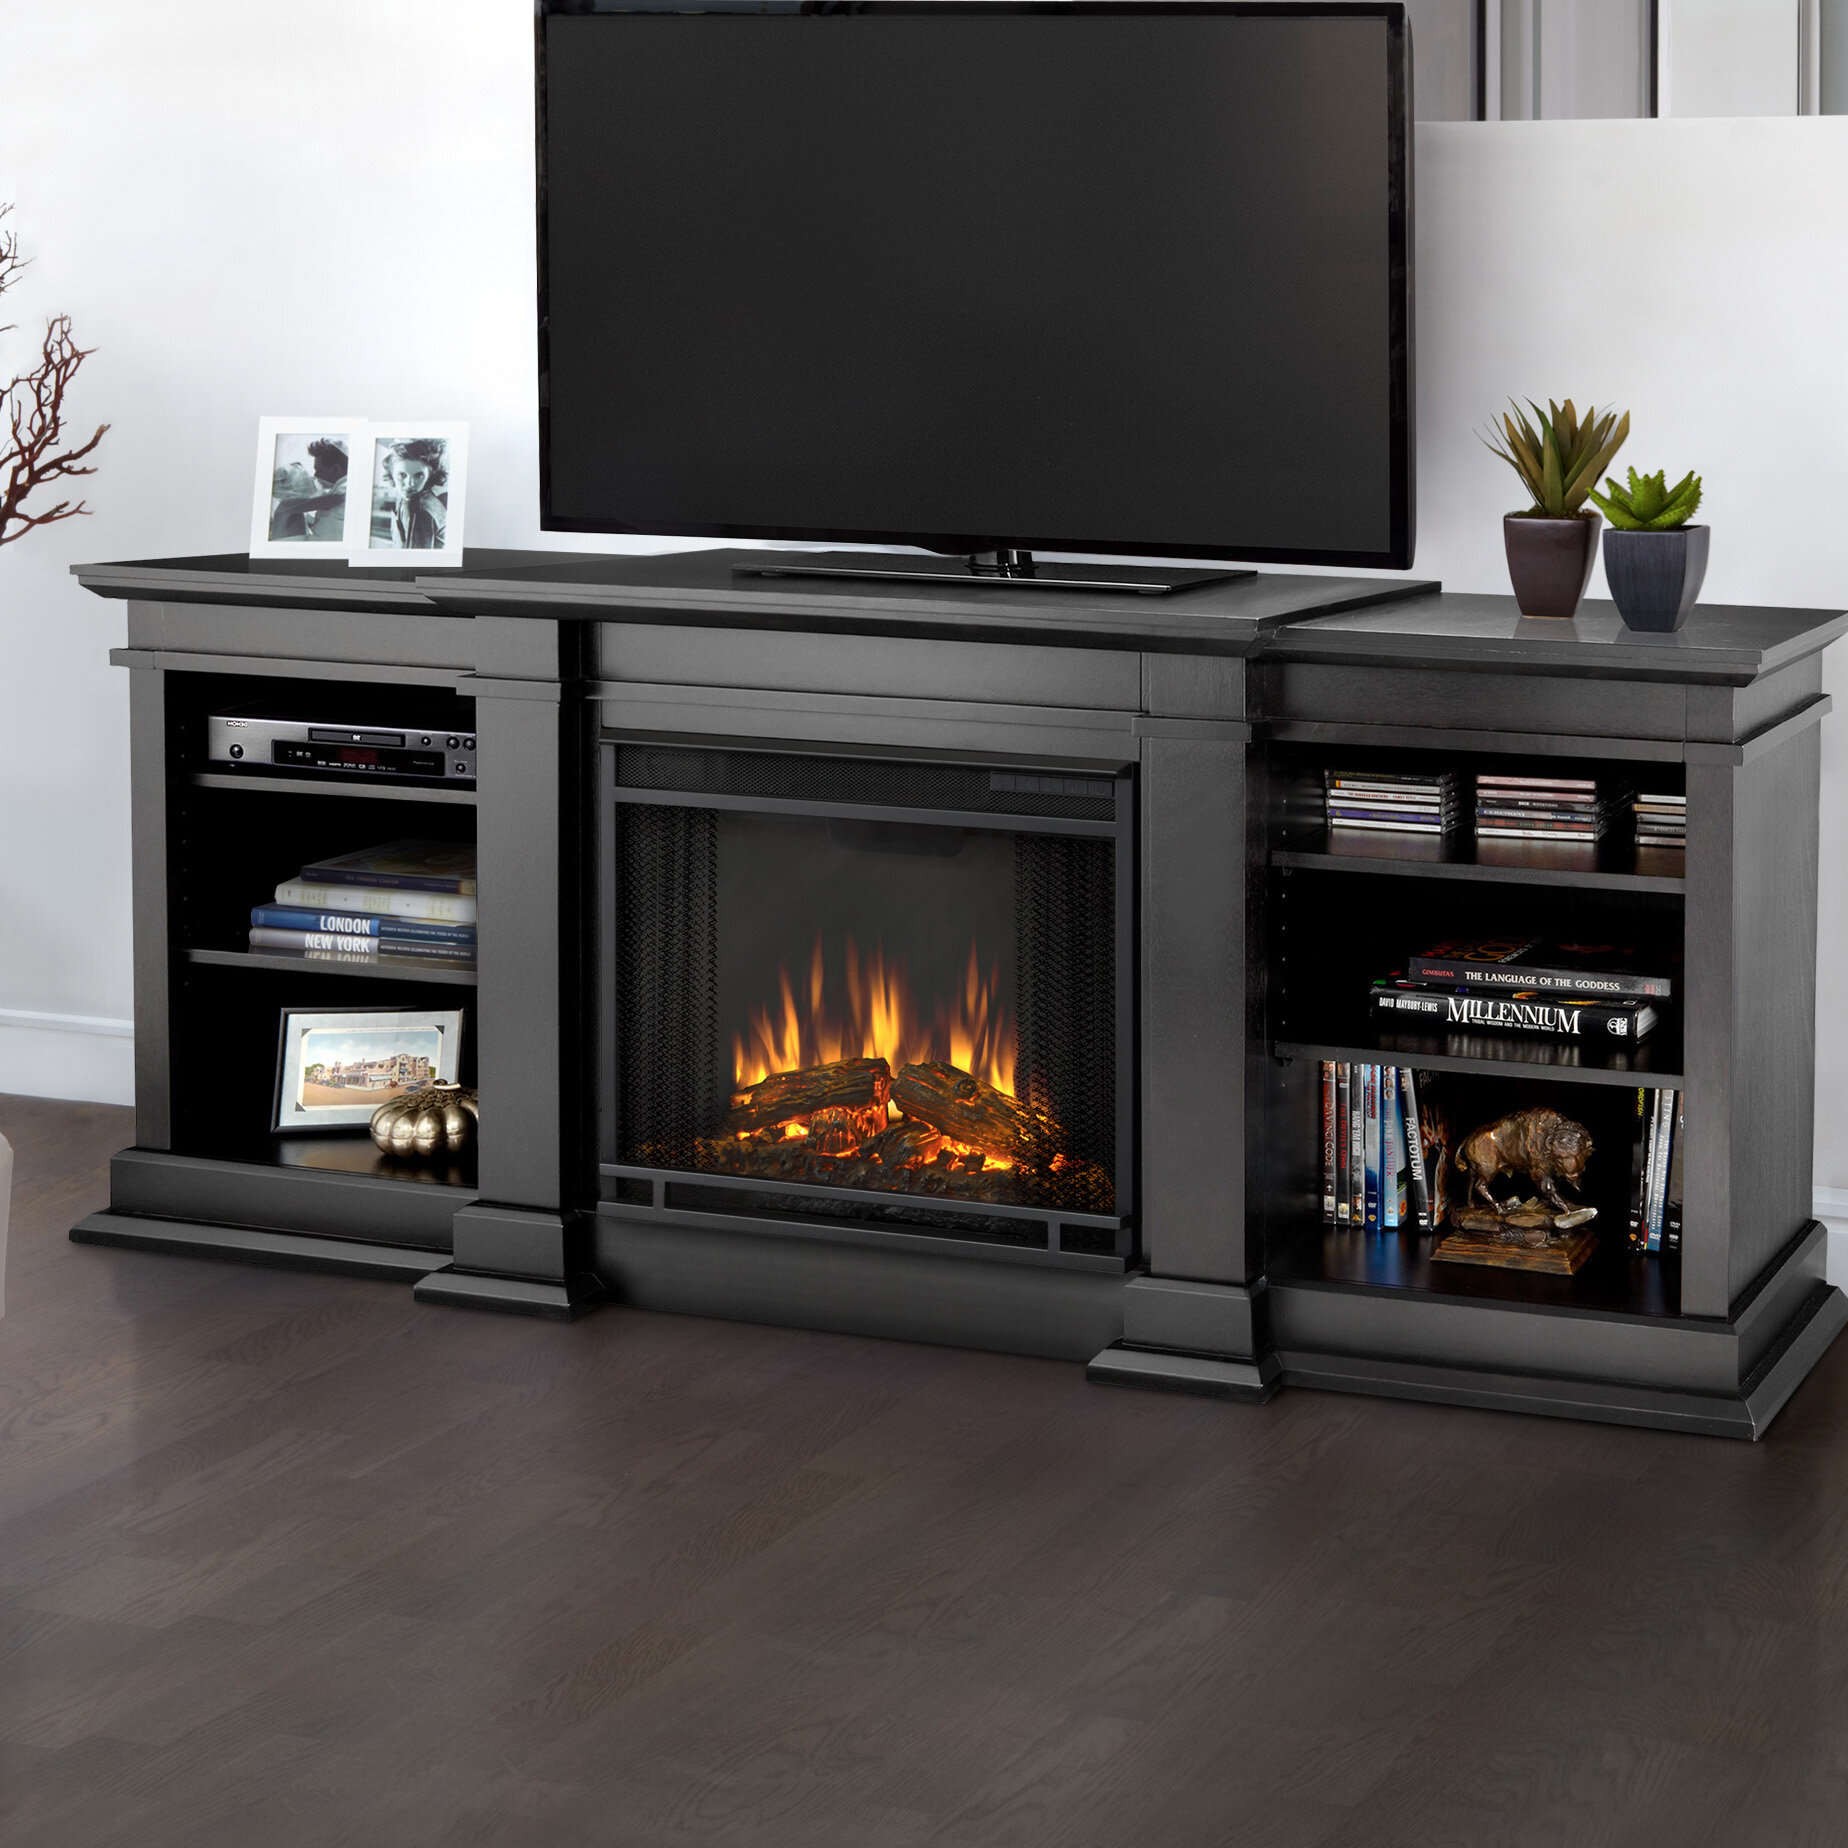 Fireplace Tv Stand for 65 Inch Tv Fresh 23 Fresh Electric Fireplace Wall Units Entertainment Center